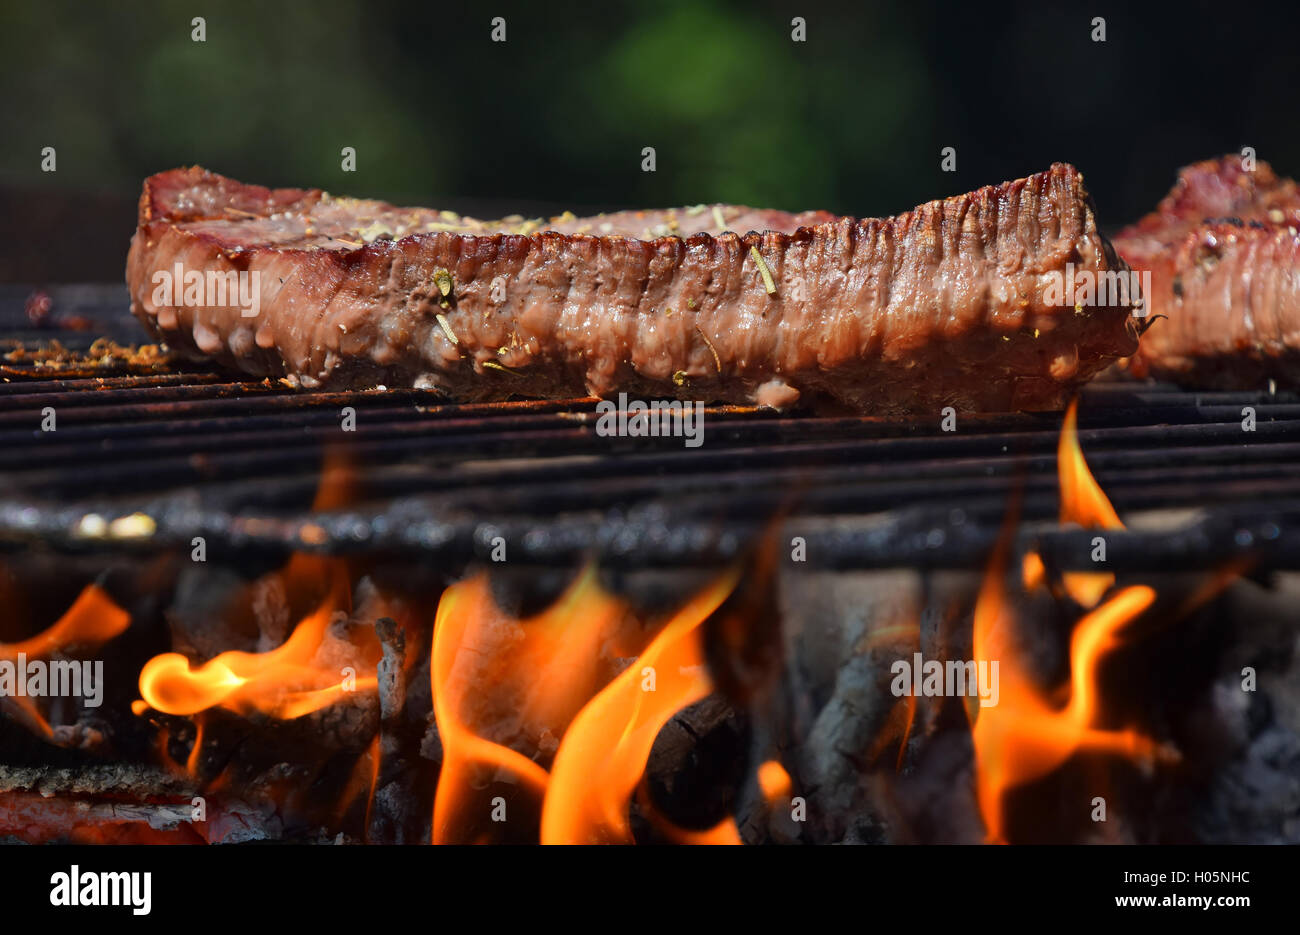 https://c8.alamy.com/comp/H05NHC/beef-steak-barbecue-prepared-grilled-on-bbq-open-fire-flame-grill-H05NHC.jpg